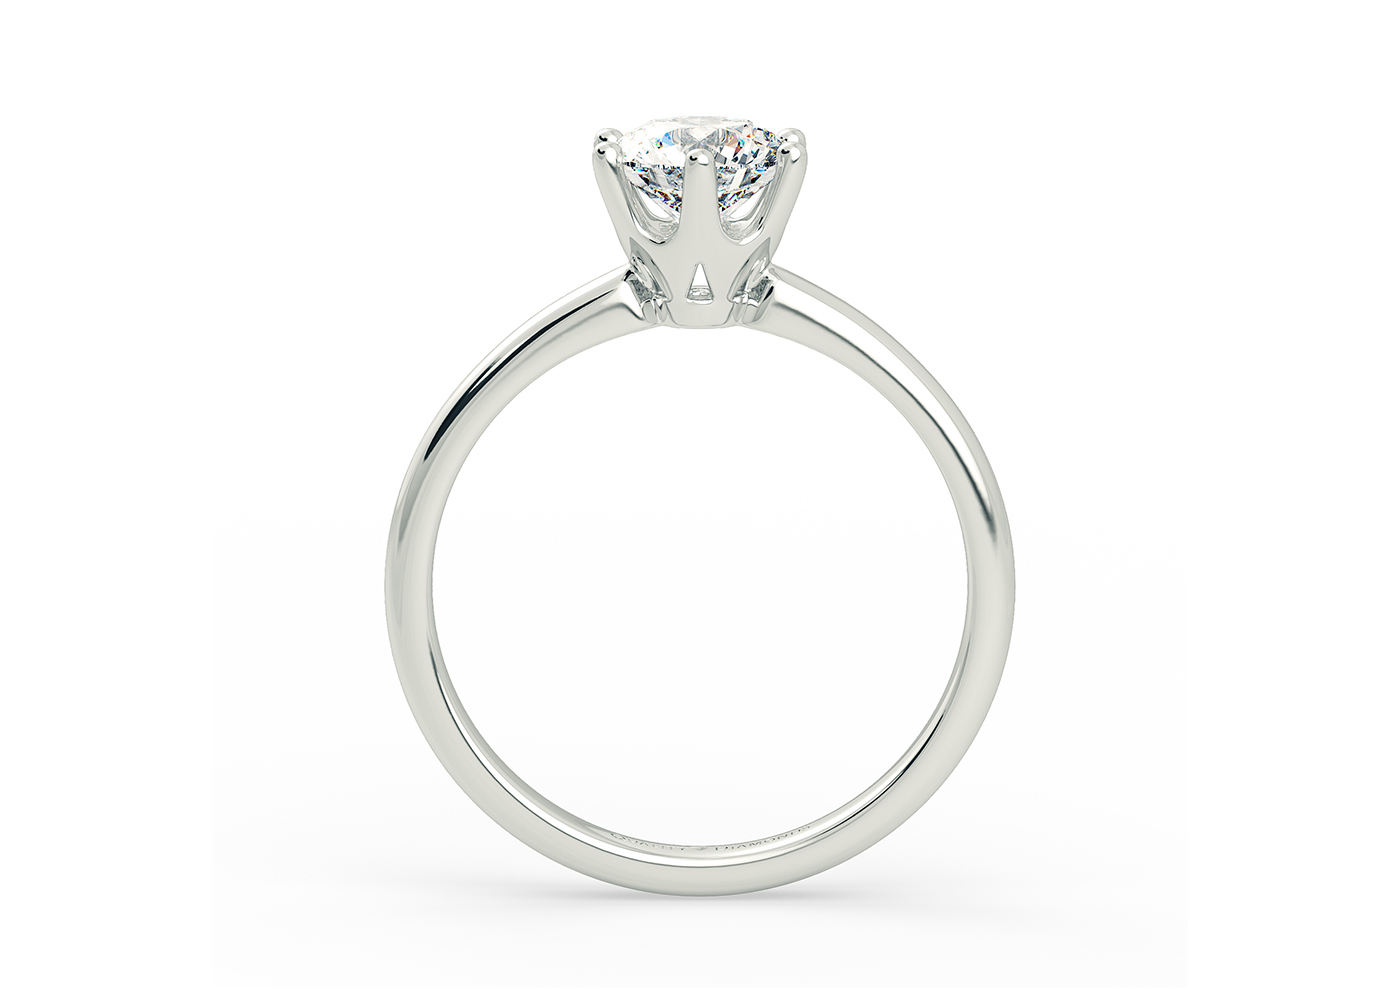 Asscher Cut Tiffany Style Engagement Ring 1.0CT - 3.0CT